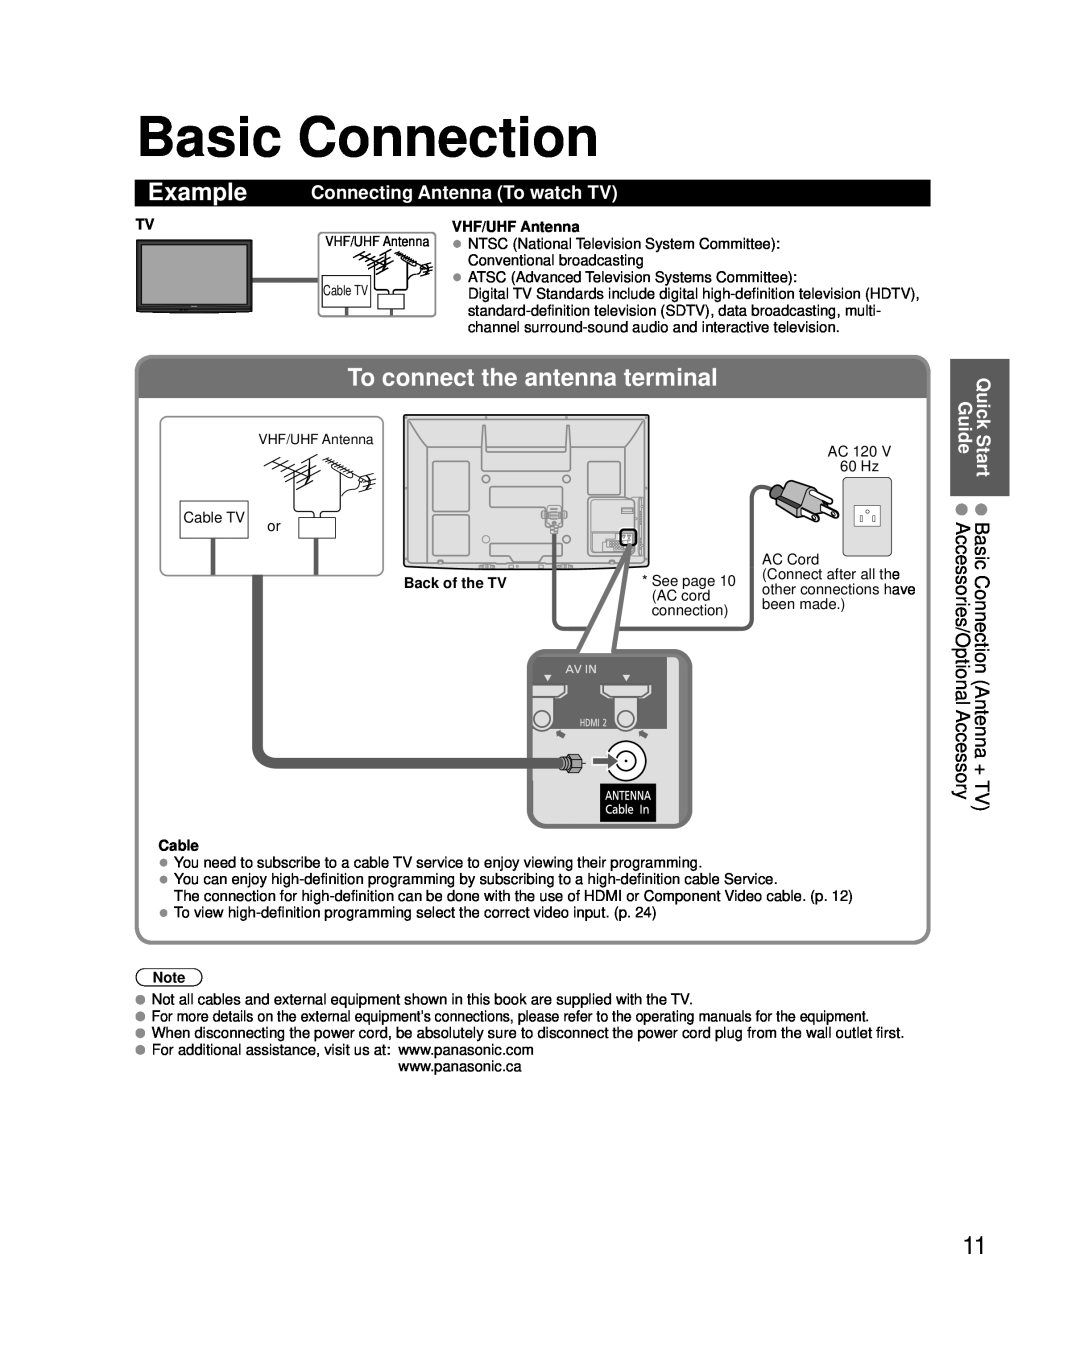 Panasonic TC-P50U2 Basic Connection, Example, To connect the antenna terminal, Connecting Antenna To watch TV, Quick Guide 